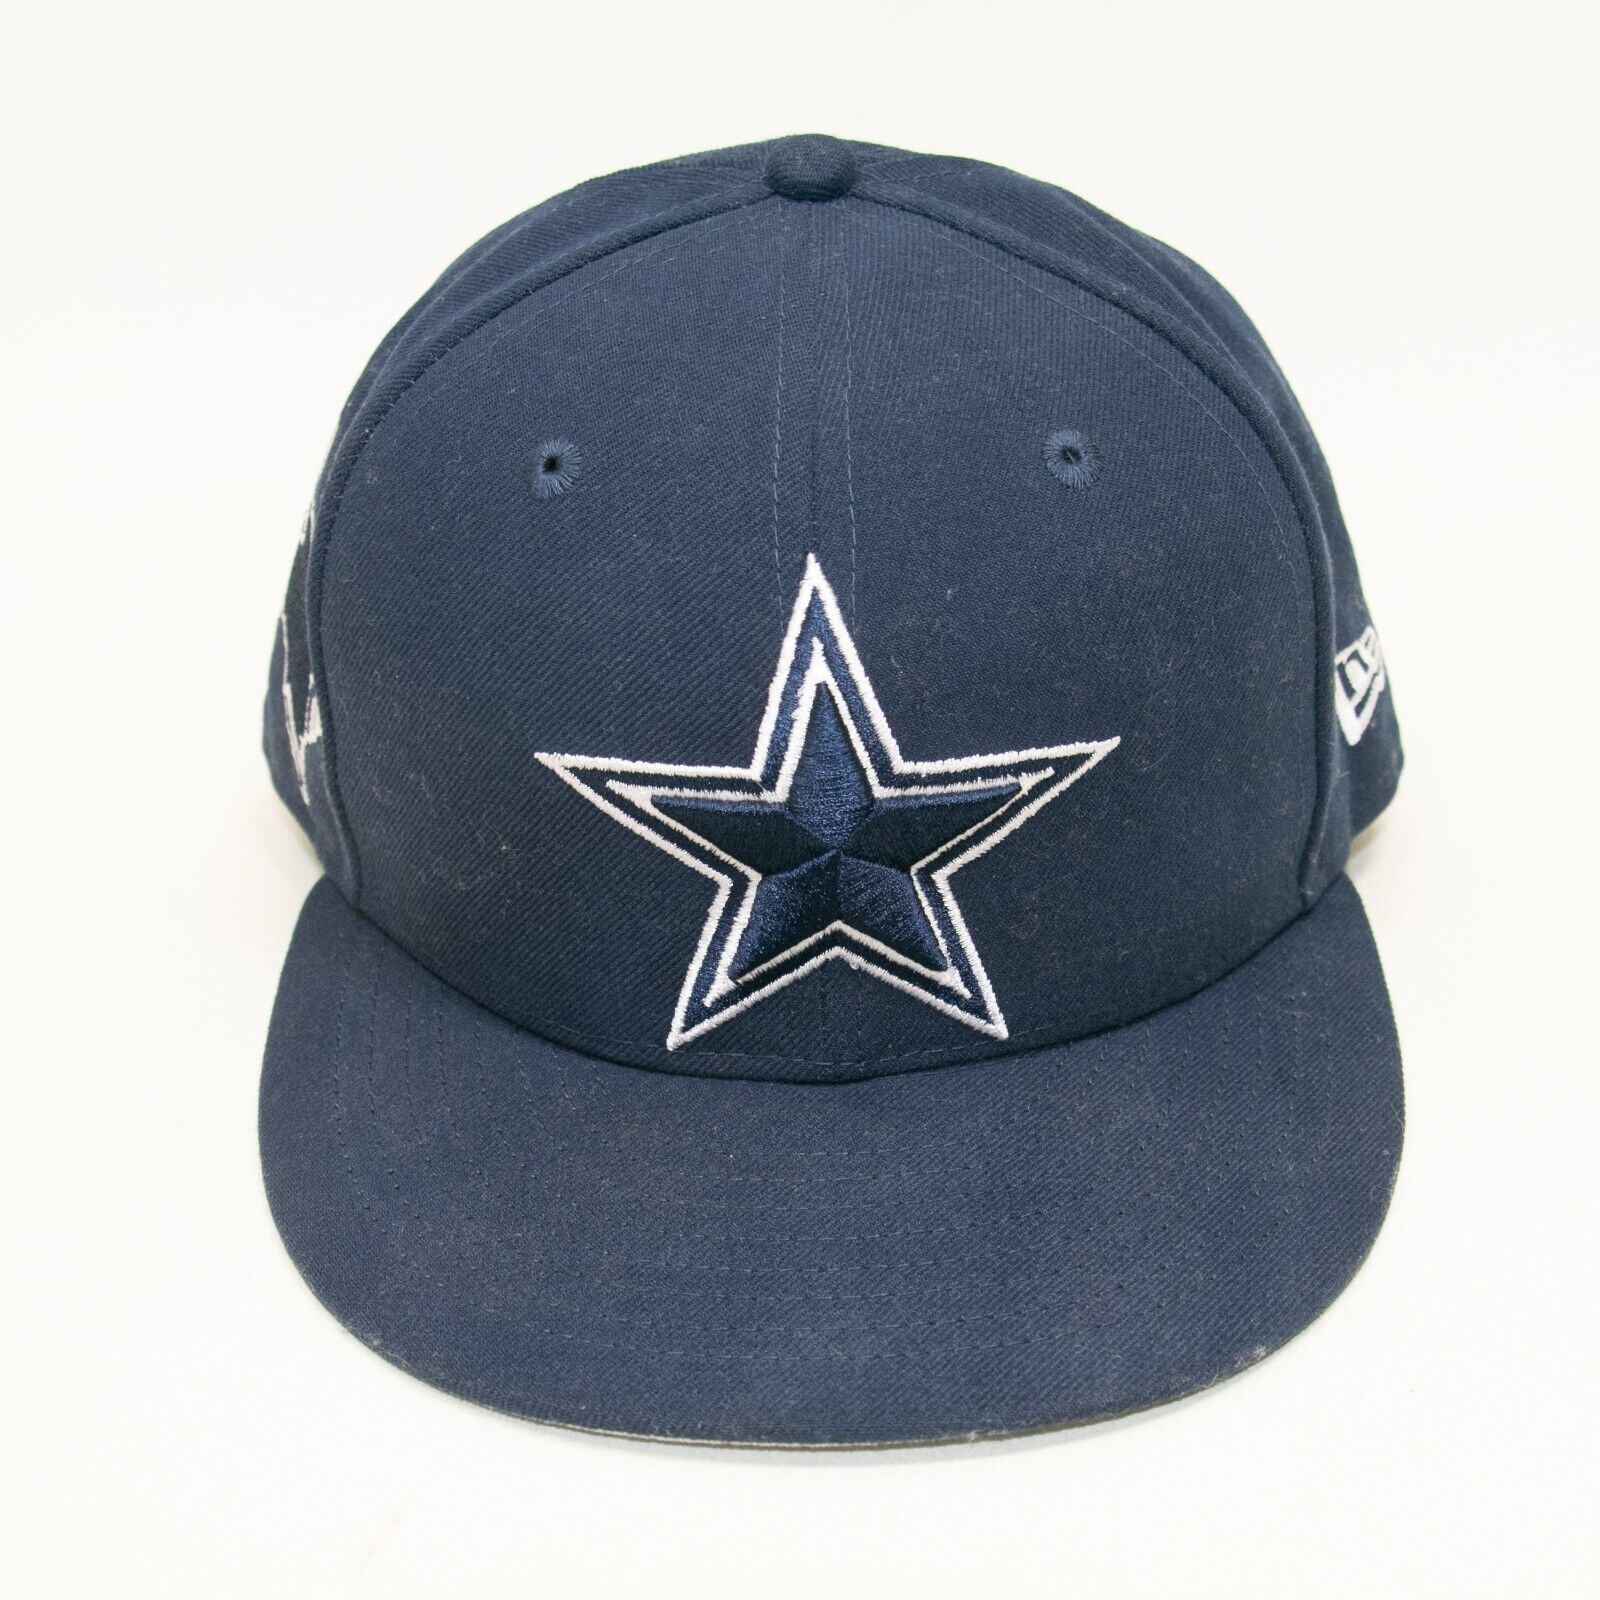 Primary image for New Era 59Fifty NFL Dallas Cowboys Navy Blue Fitted Baseball Hat Size 7.5 TEXAS